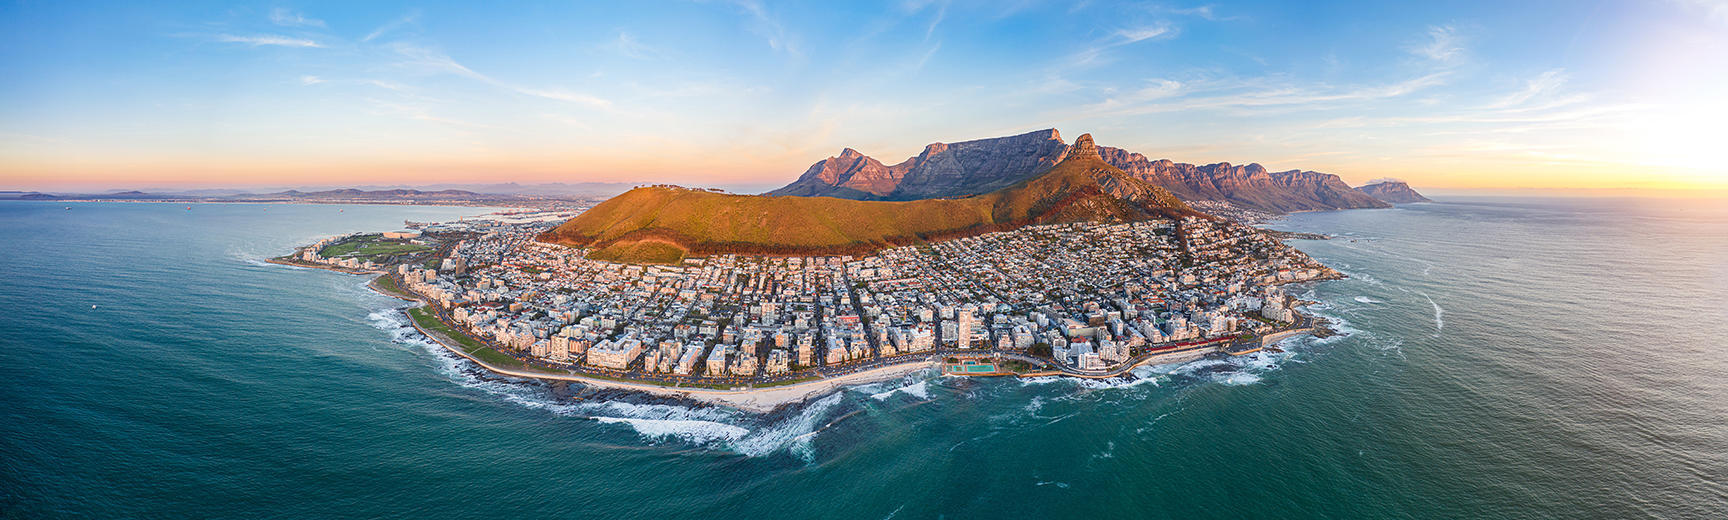 Aerial shot of Cape Town with Table Top Mountain CREDIT Shutterstock